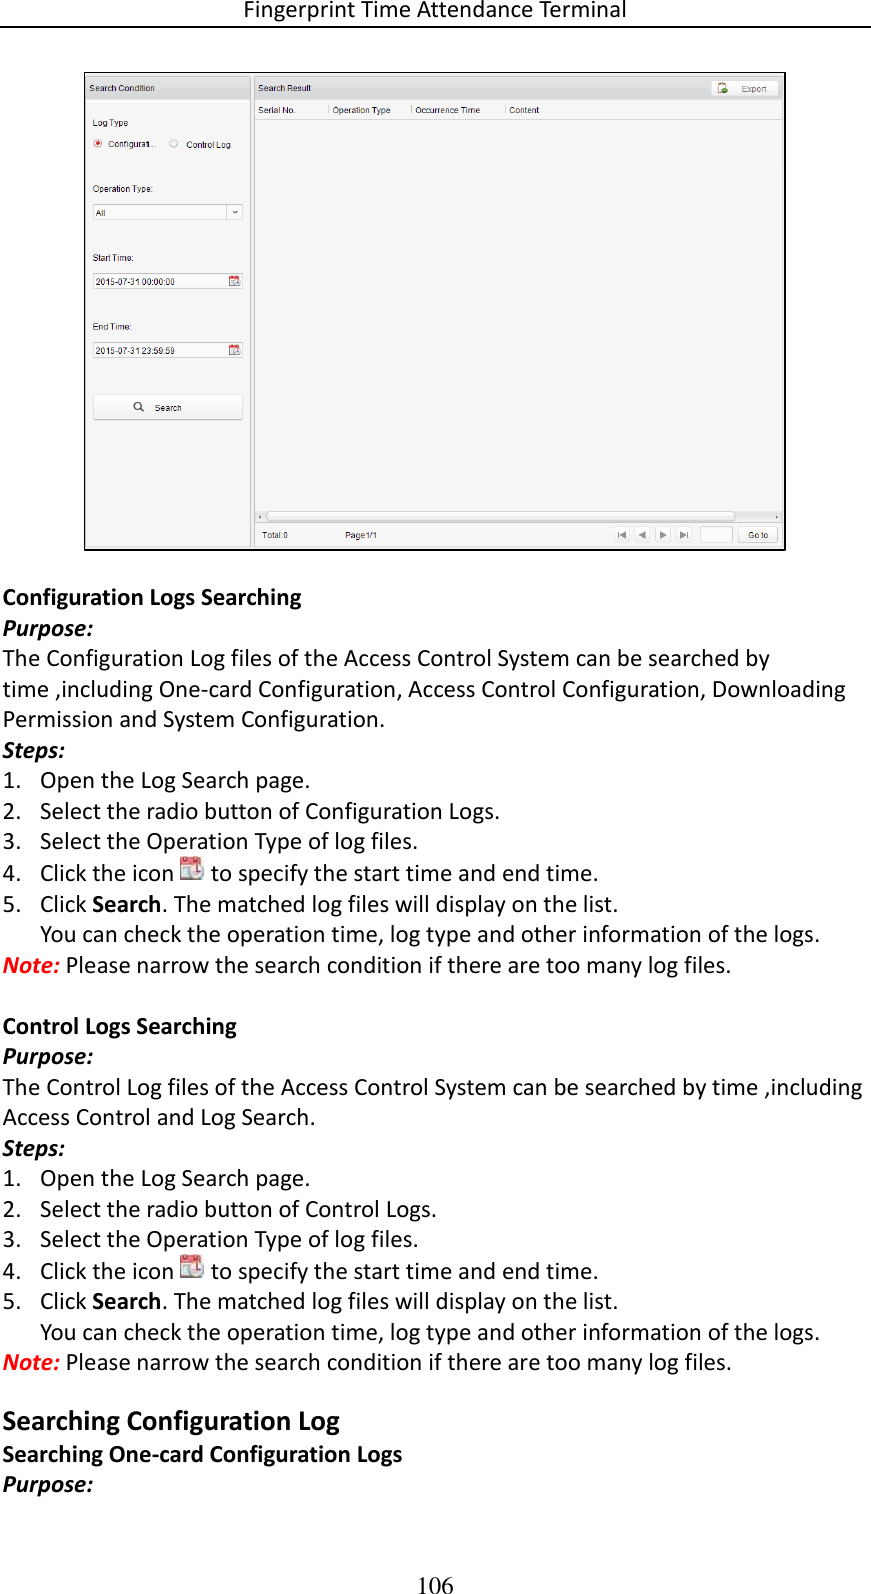 Fingerprint Time Attendance Terminal 106   Configuration Logs Searching Purpose: The Configuration Log files of the Access Control System can be searched by time ,including One-card Configuration, Access Control Configuration, Downloading Permission and System Configuration. Steps: 1. Open the Log Search page. 2. Select the radio button of Configuration Logs. 3. Select the Operation Type of log files. 4. Click the icon   to specify the start time and end time. 5. Click Search. The matched log files will display on the list. You can check the operation time, log type and other information of the logs. Note: Please narrow the search condition if there are too many log files.  Control Logs Searching Purpose: The Control Log files of the Access Control System can be searched by time ,including Access Control and Log Search. Steps: 1. Open the Log Search page. 2. Select the radio button of Control Logs. 3. Select the Operation Type of log files. 4. Click the icon   to specify the start time and end time. 5. Click Search. The matched log files will display on the list. You can check the operation time, log type and other information of the logs. Note: Please narrow the search condition if there are too many log files. Searching Configuration Log Searching One-card Configuration Logs Purpose: 